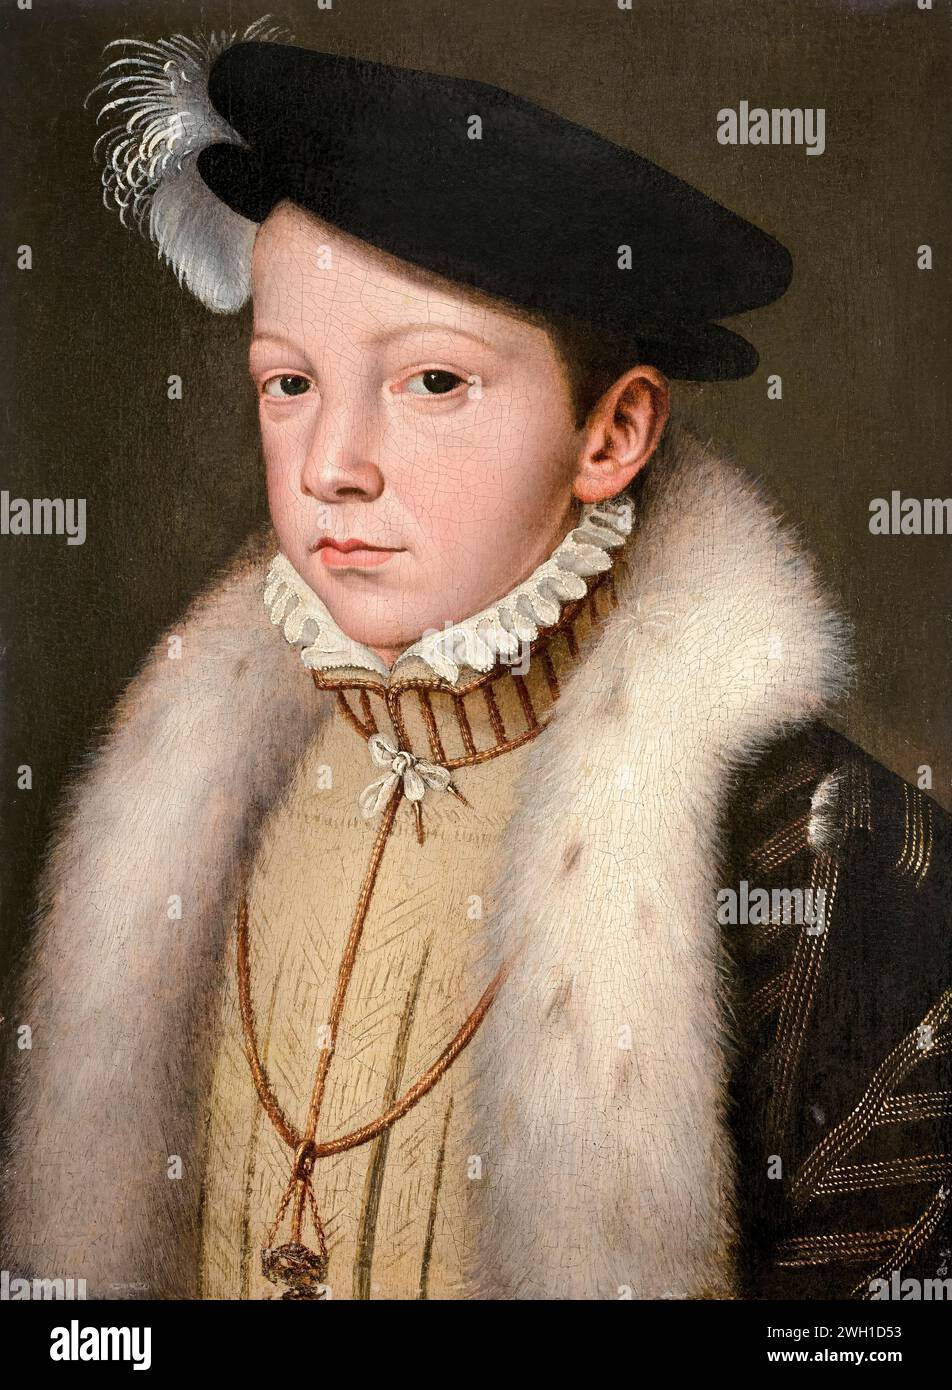 Francis II (1544-1560), King of France (1559-1560) and King Consort of Scotland as the first husband of Mary, Queen of Scots (1558-1560), portrait painting in oil on panel by Francois Clouet, 1558 Stock Photo